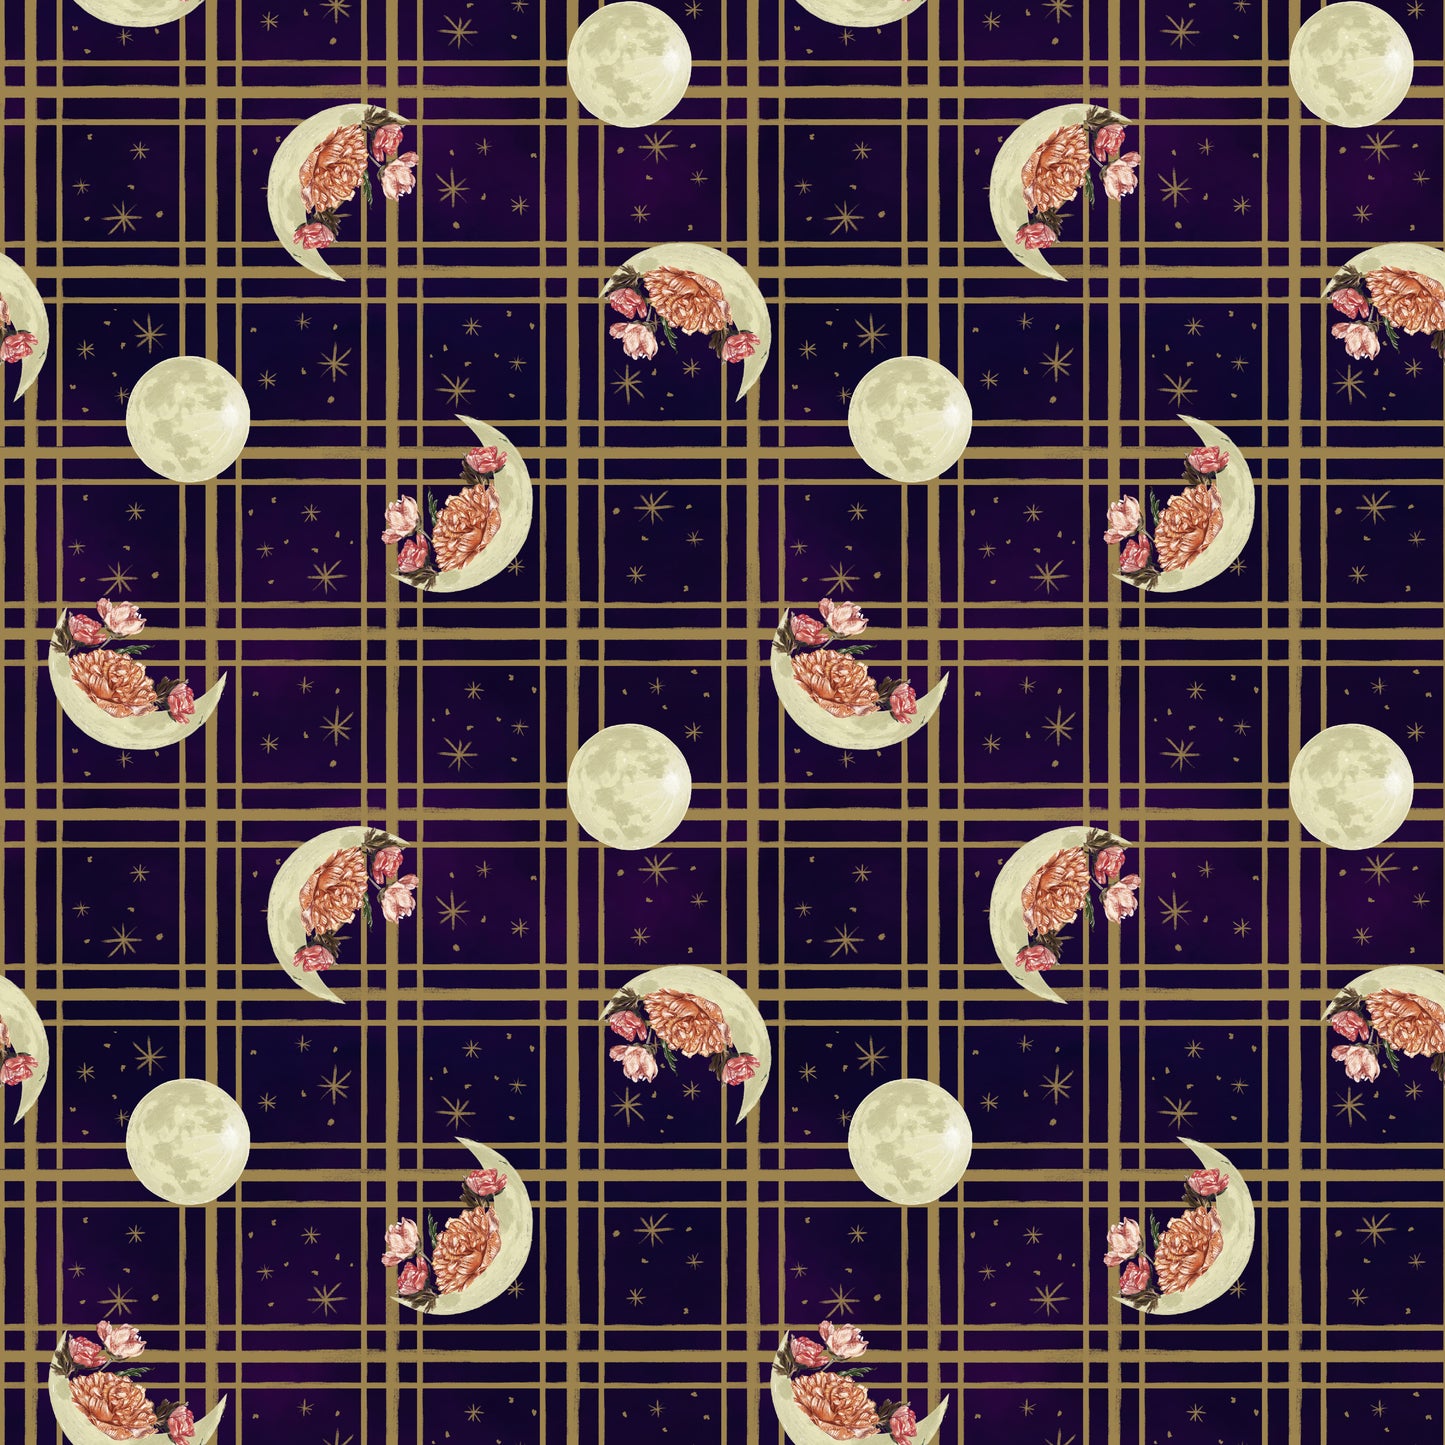 Midnight Rendezvous by Raquel Maciel Moons with Flowers on Plaid Dark Purple    2900-59 Cotton Woven Fabric